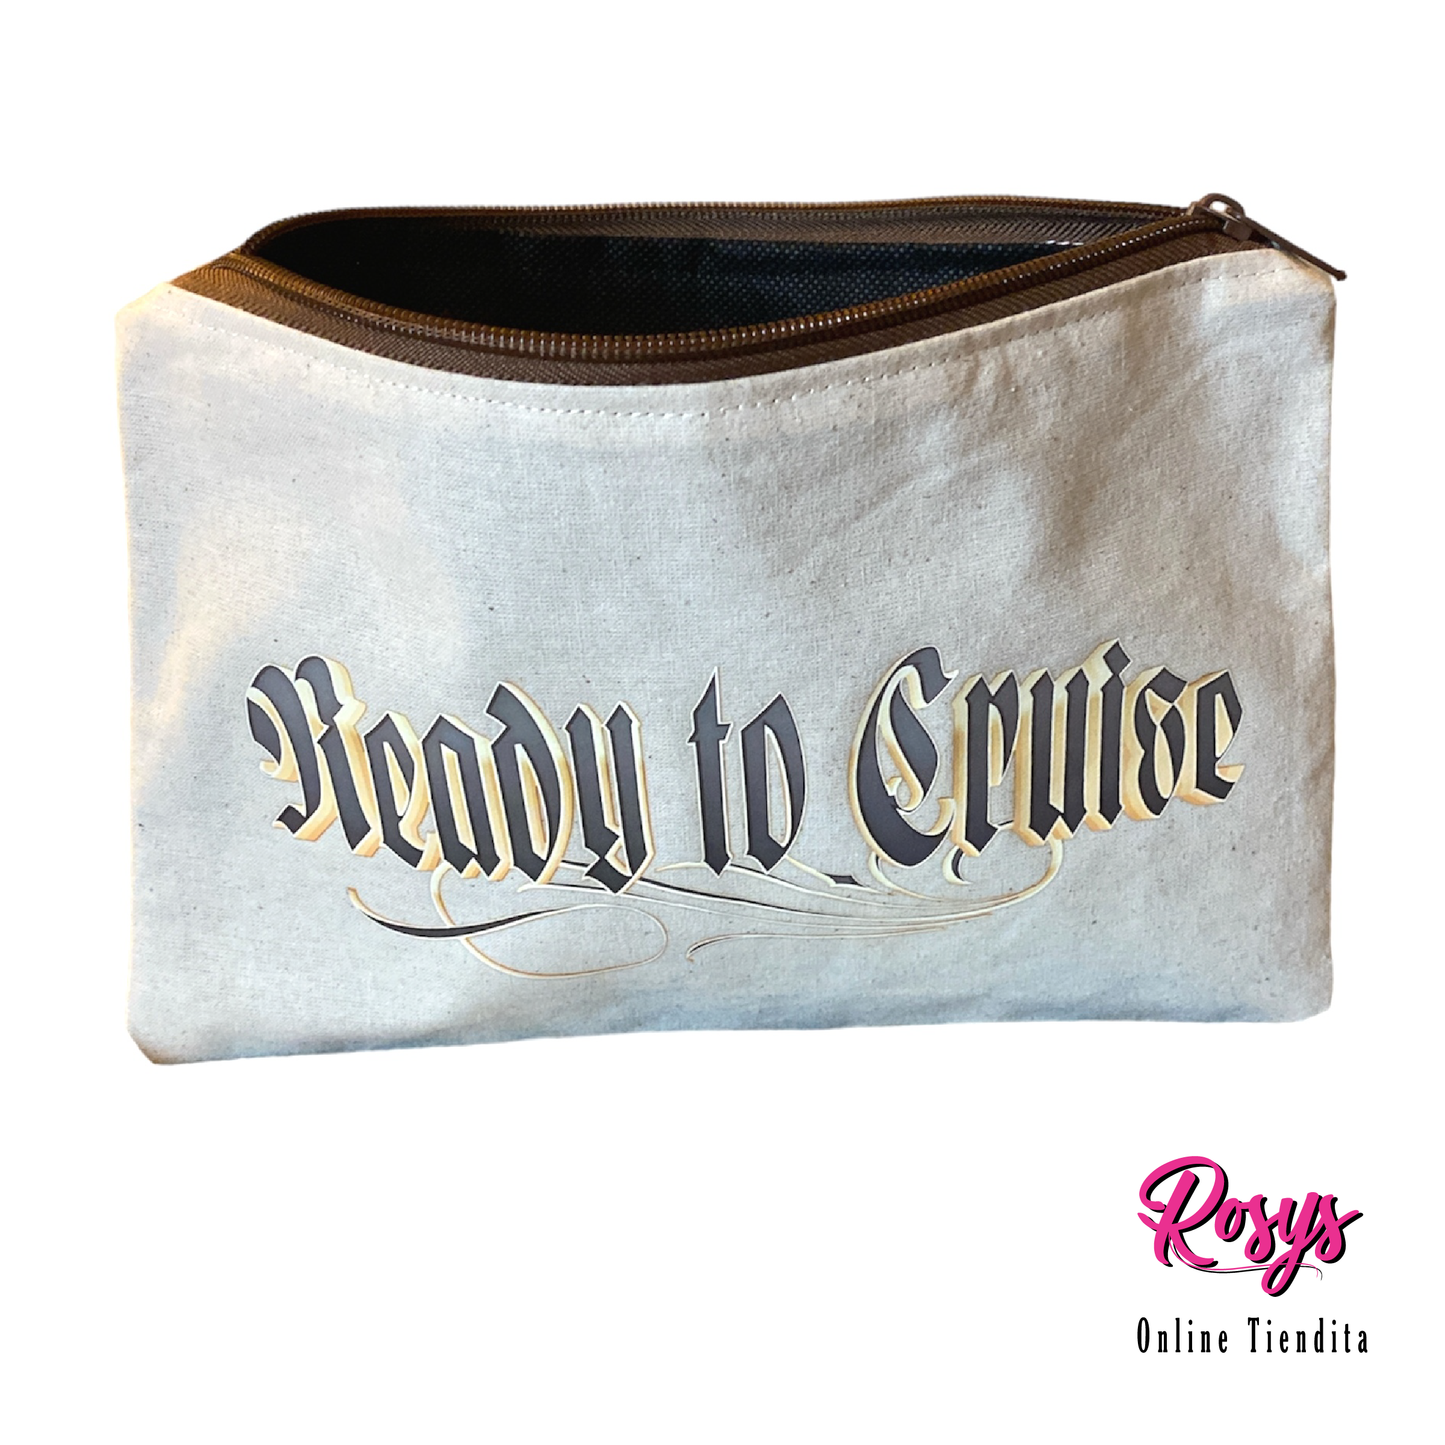 Ready to Cruise Cosmetic Bag | Cosmetic Bags